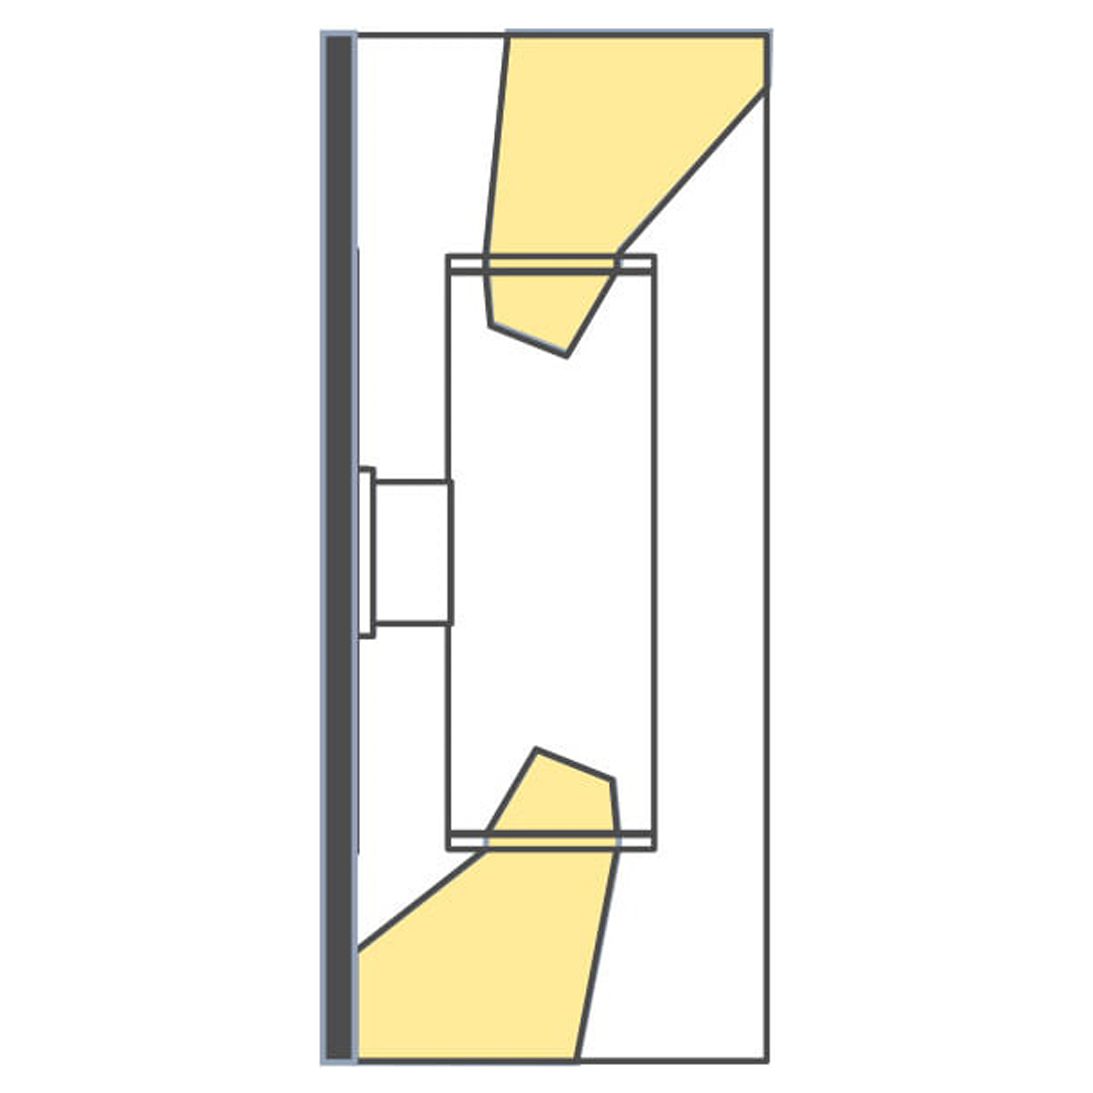 Wac Lighting Dc-Wd05-Fc Cube Architectural 2 Light 13" Tall Led Outdoor Wall Sconce - - image 4 of 4